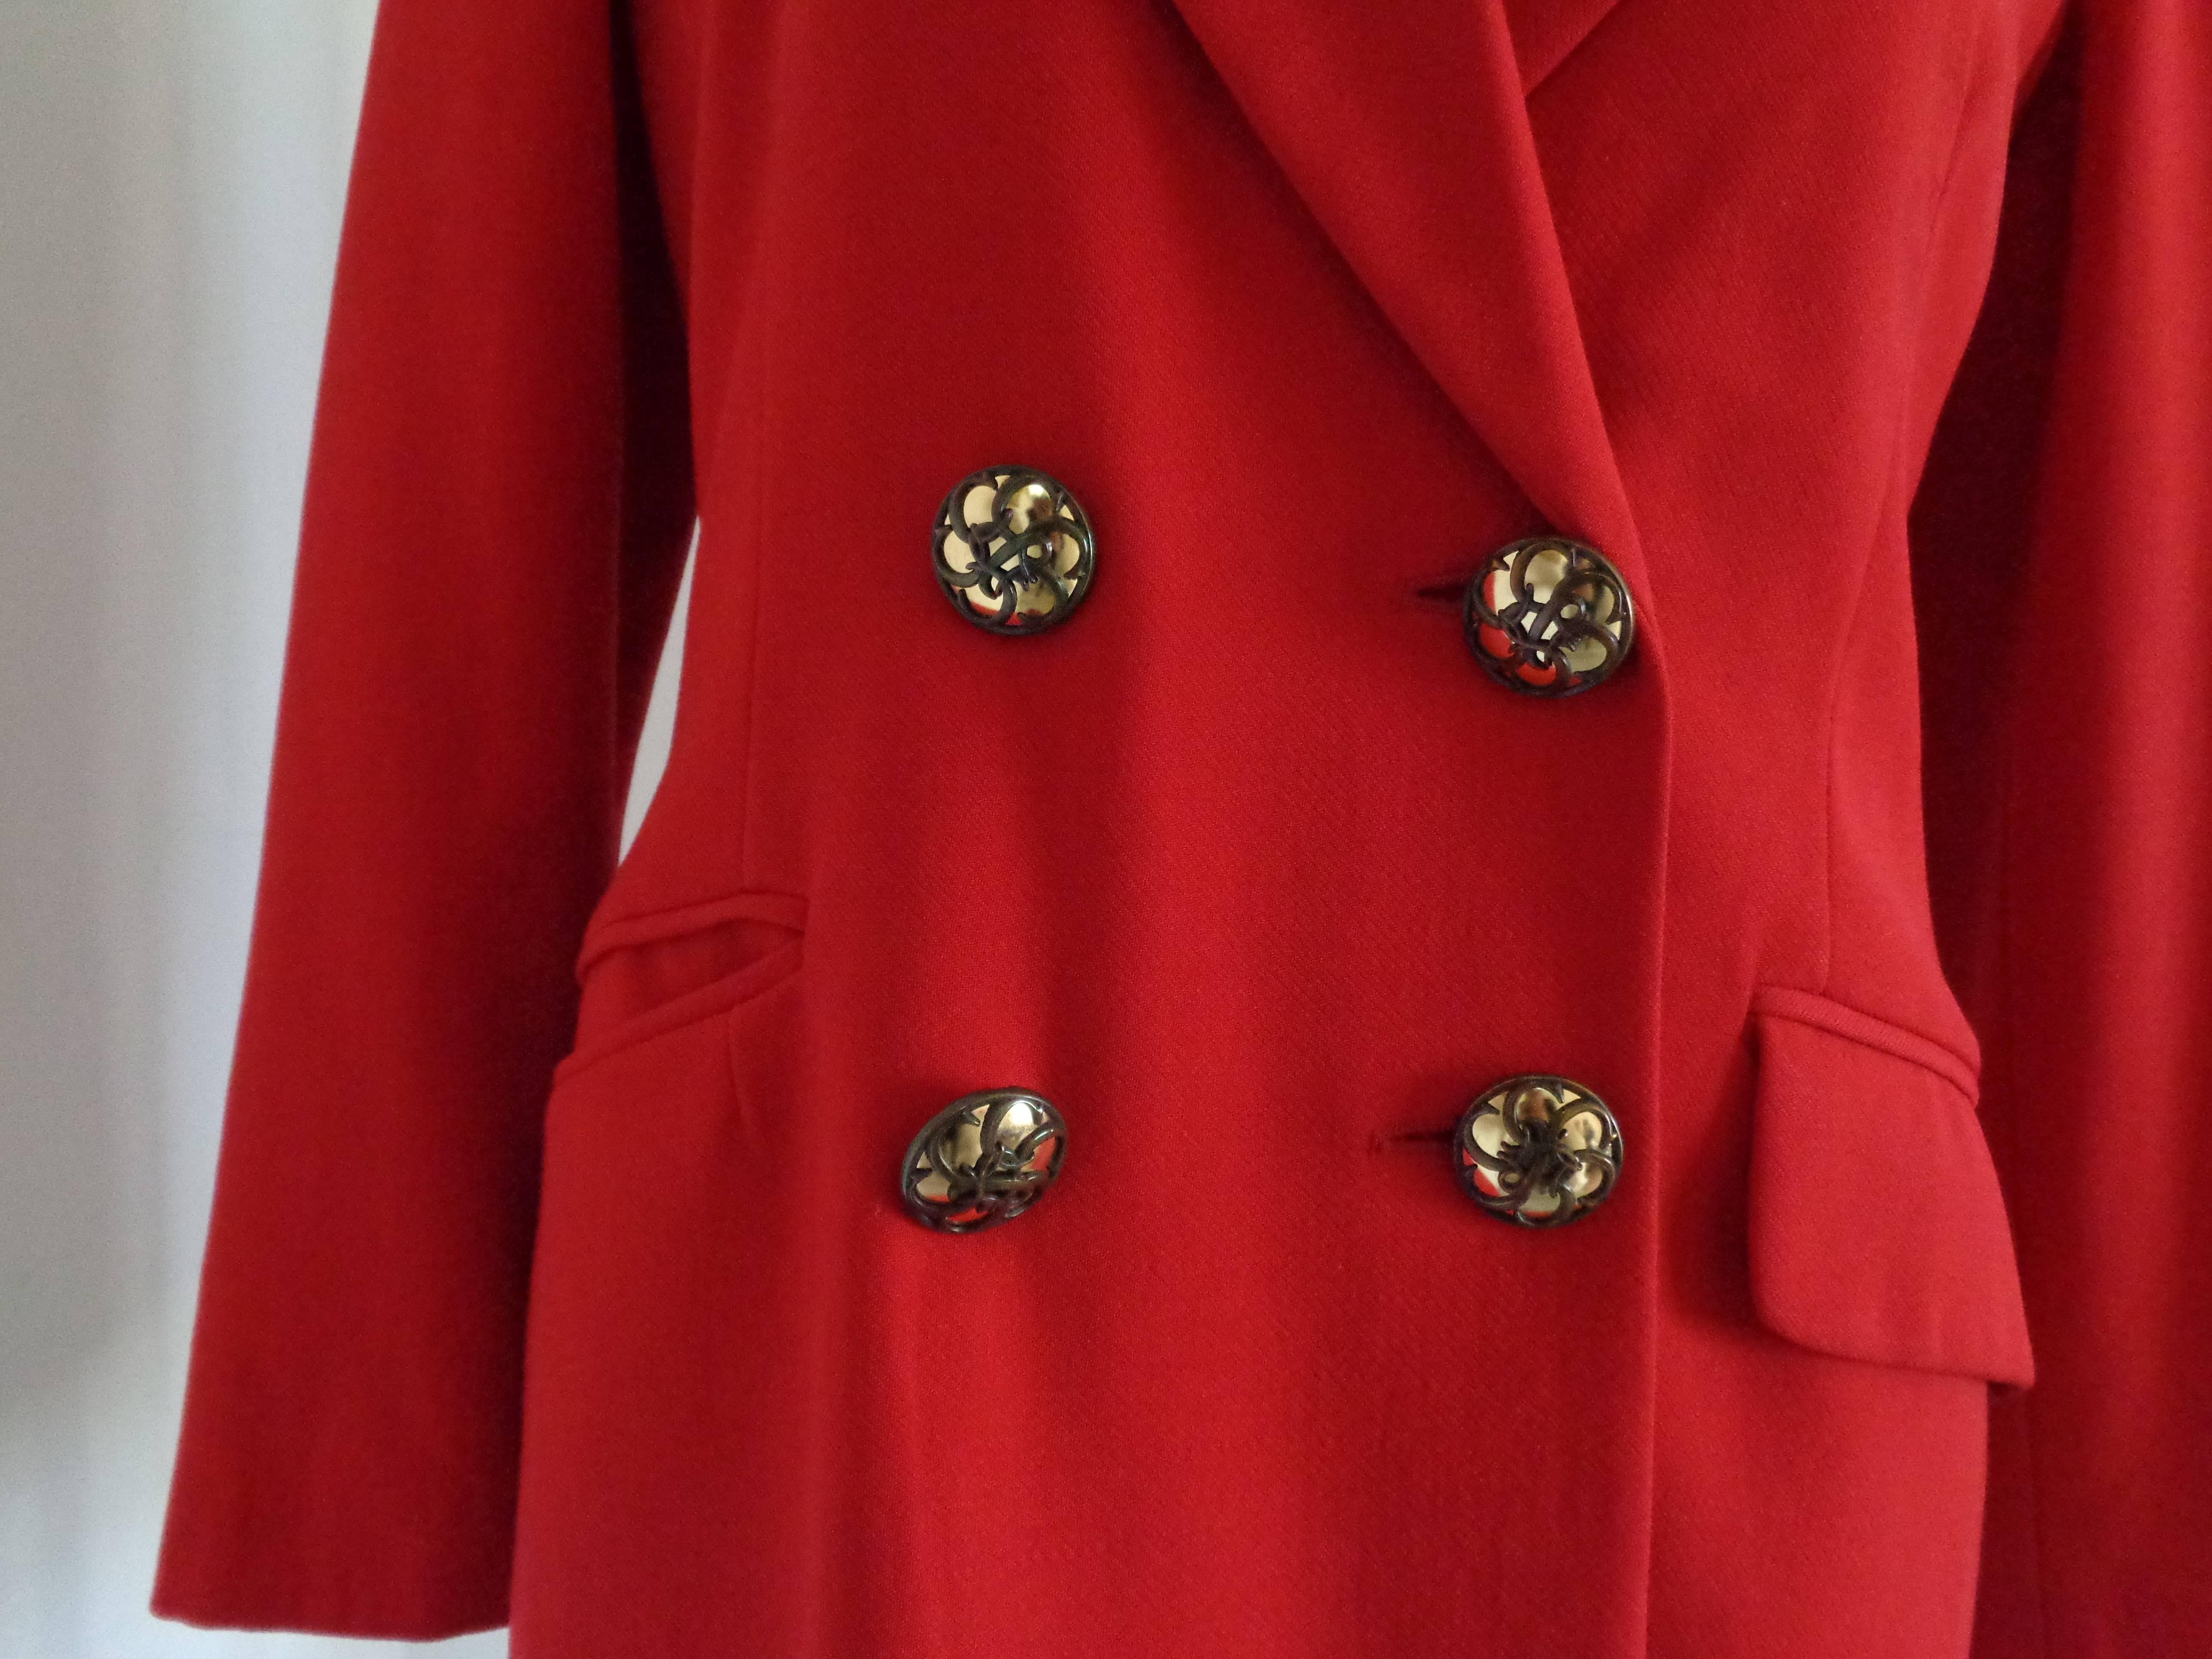 Moschino Cheap & Chic Red Wool Jacket


embellished with gold tone grey double CC Bottons
Totally made in italy in italian size range 44

Composition: Wool 
Lining: Rayon